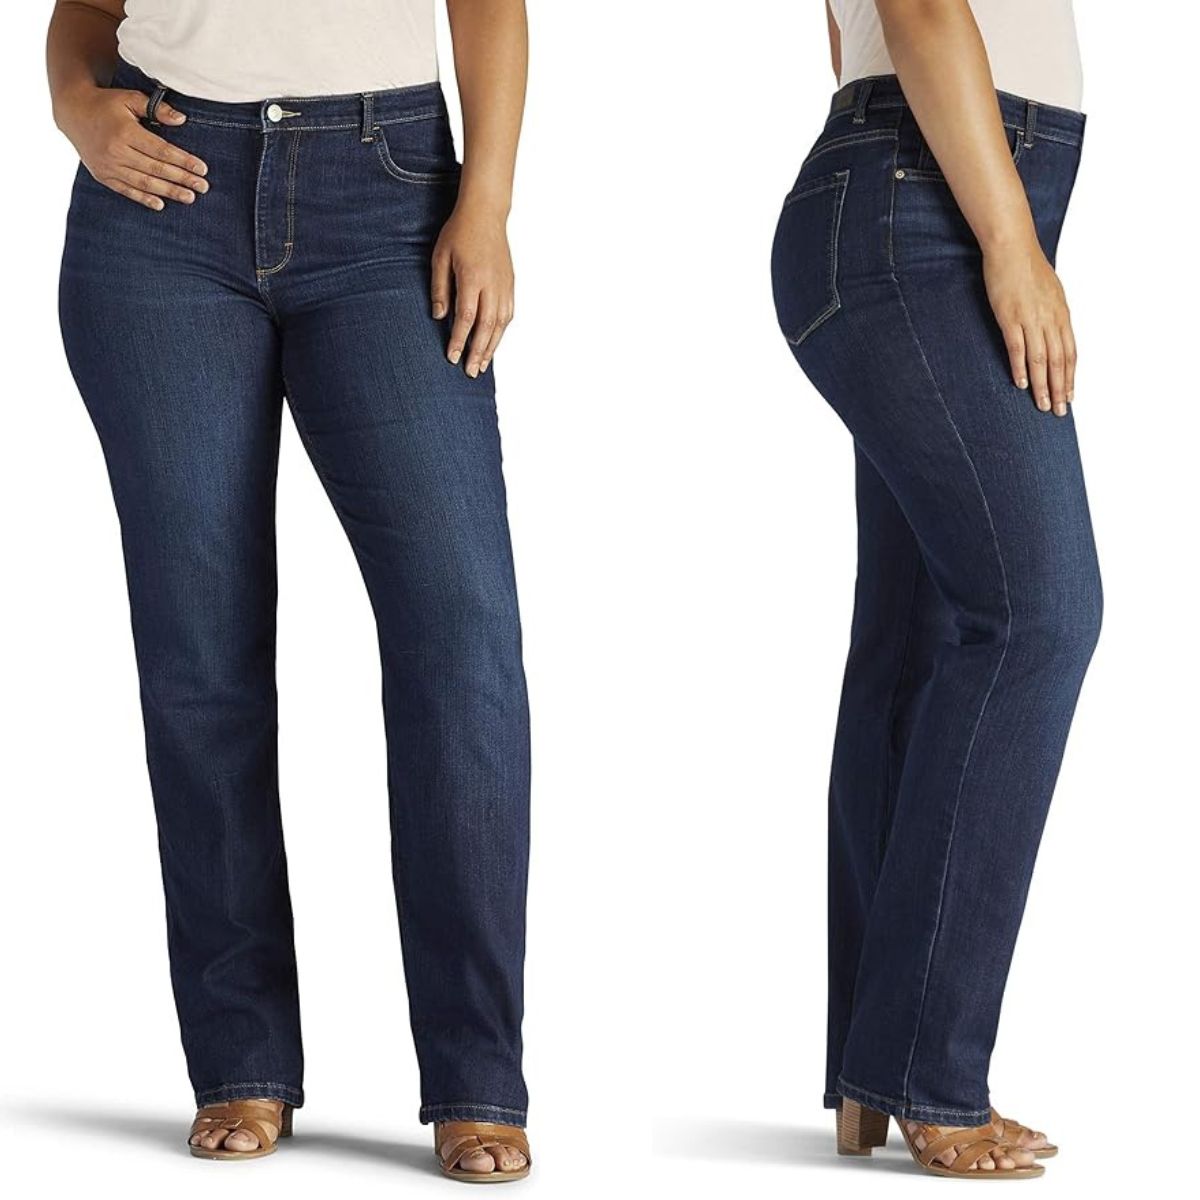 Just My Size Women's Plus Size Pull On Stretch Denim Jegging 